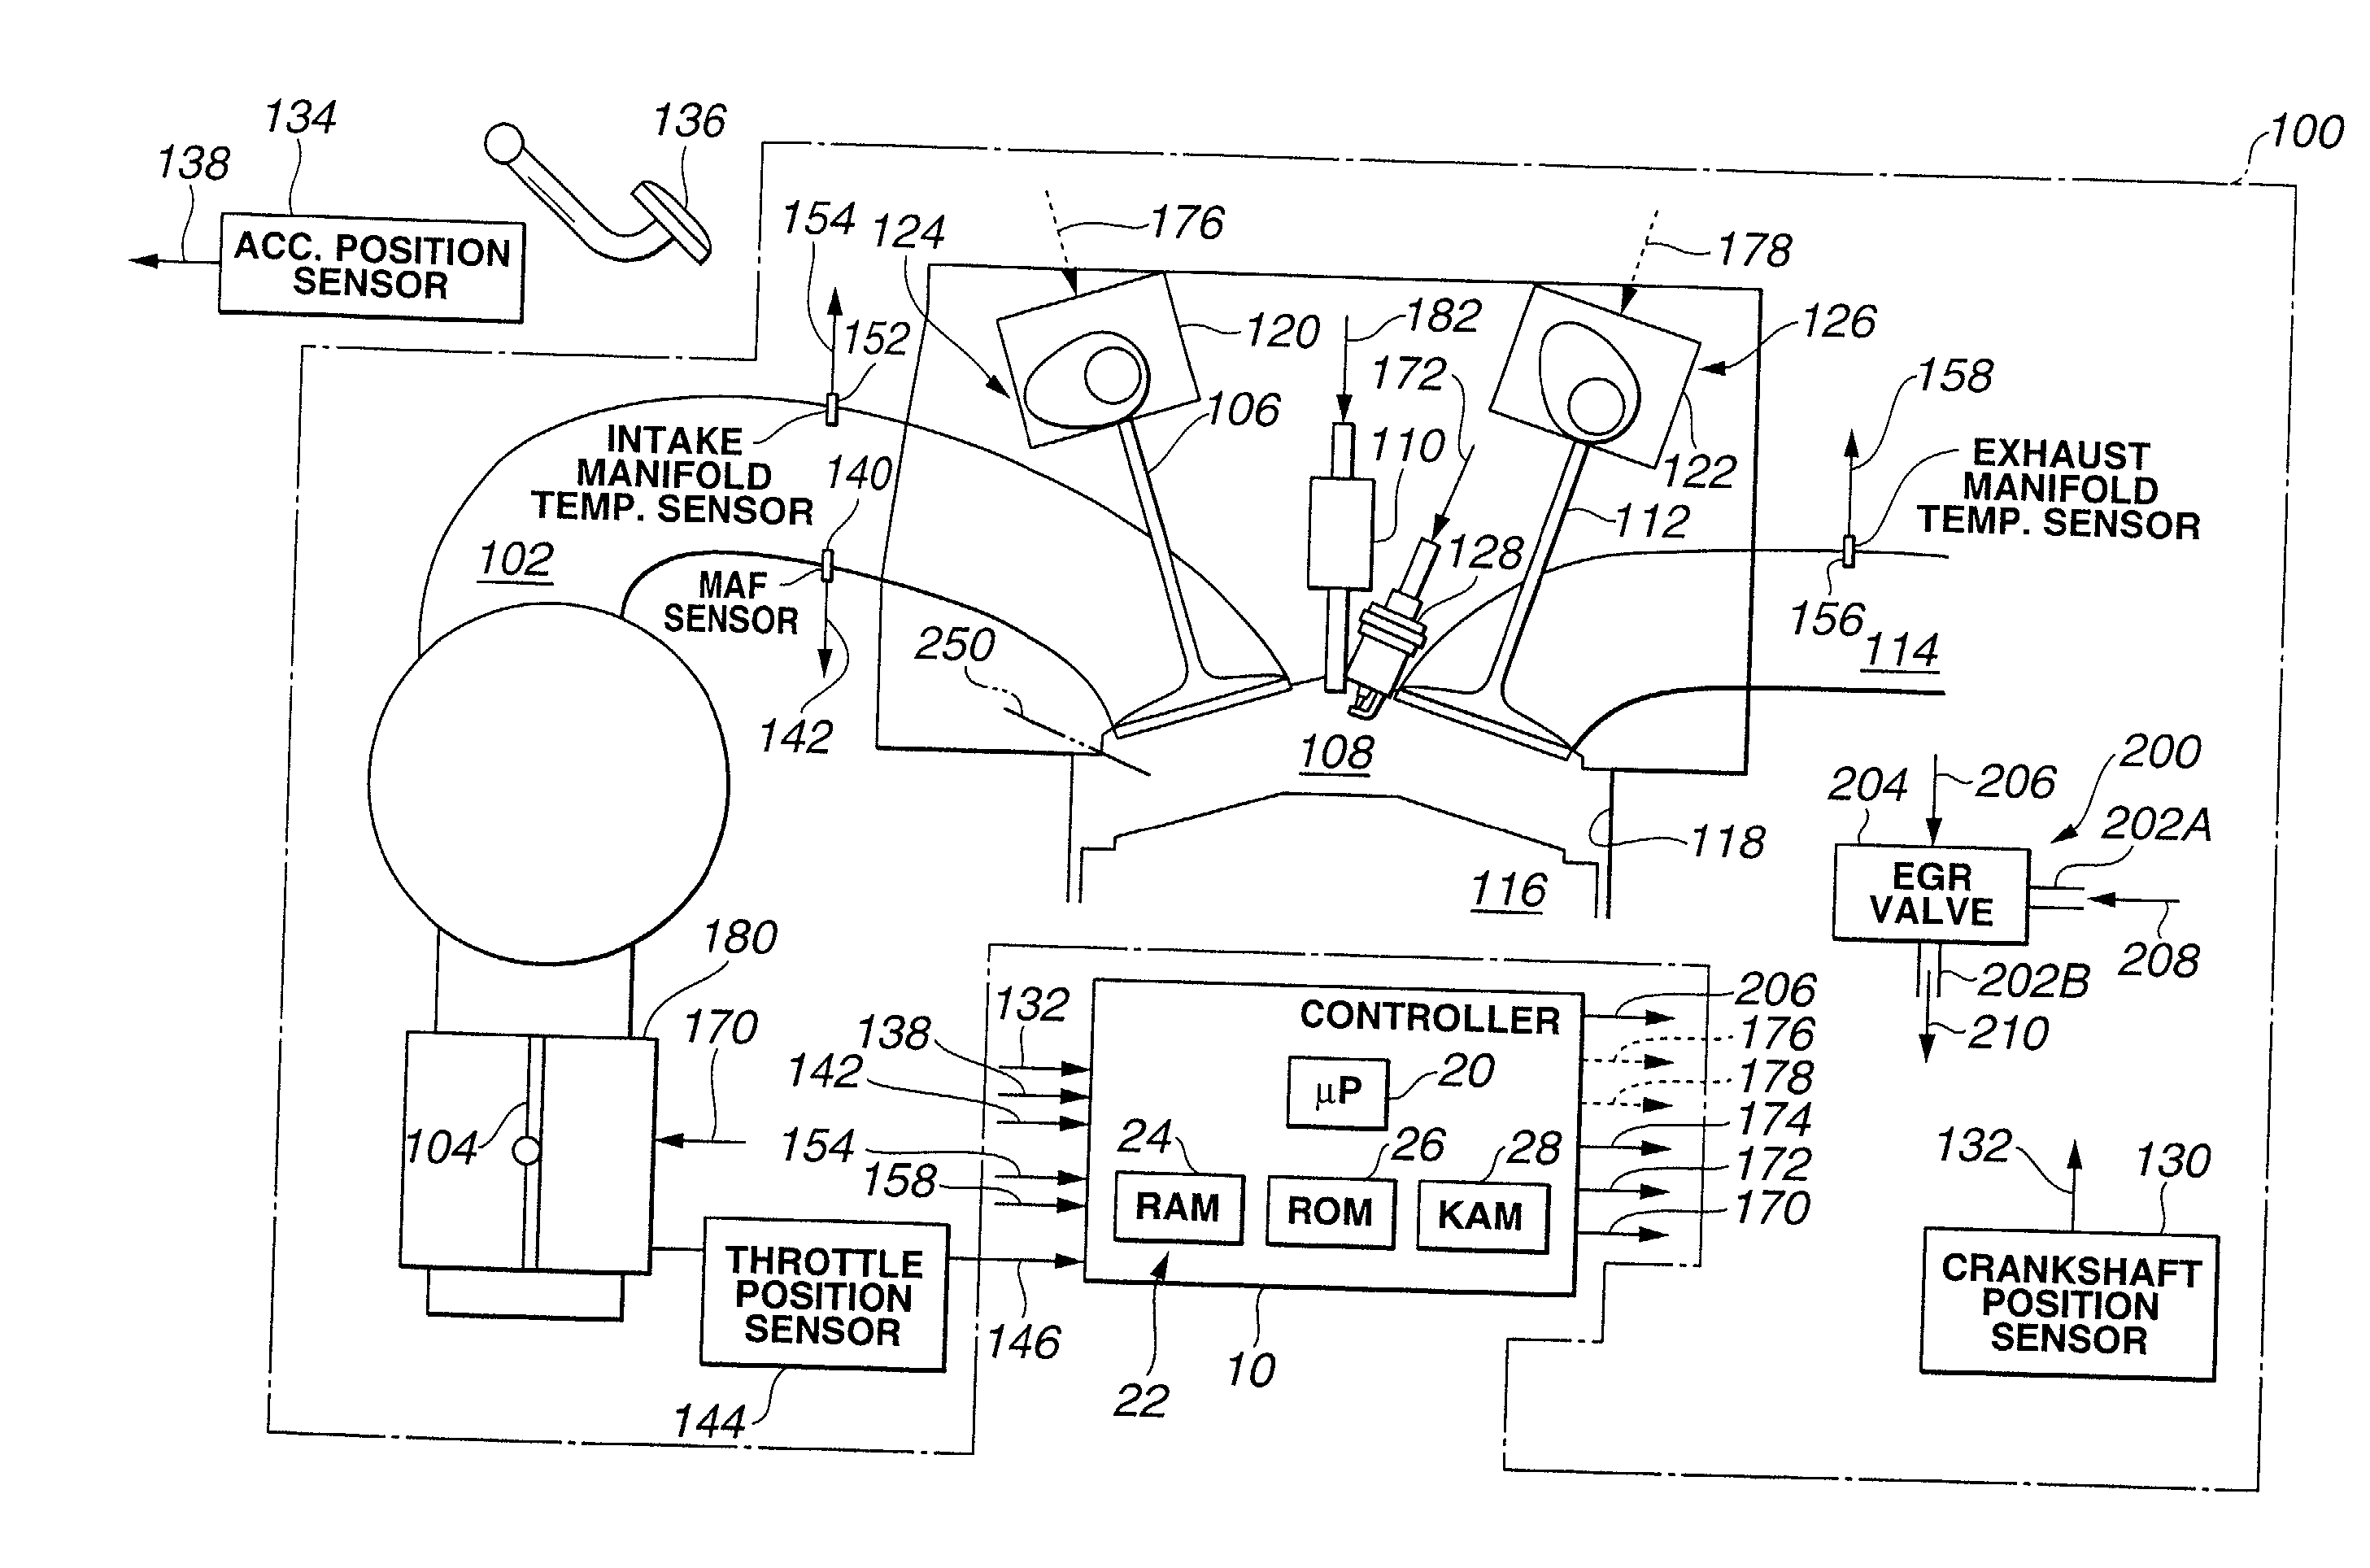 System and method for enhanced combustion control in an internal combustion engine